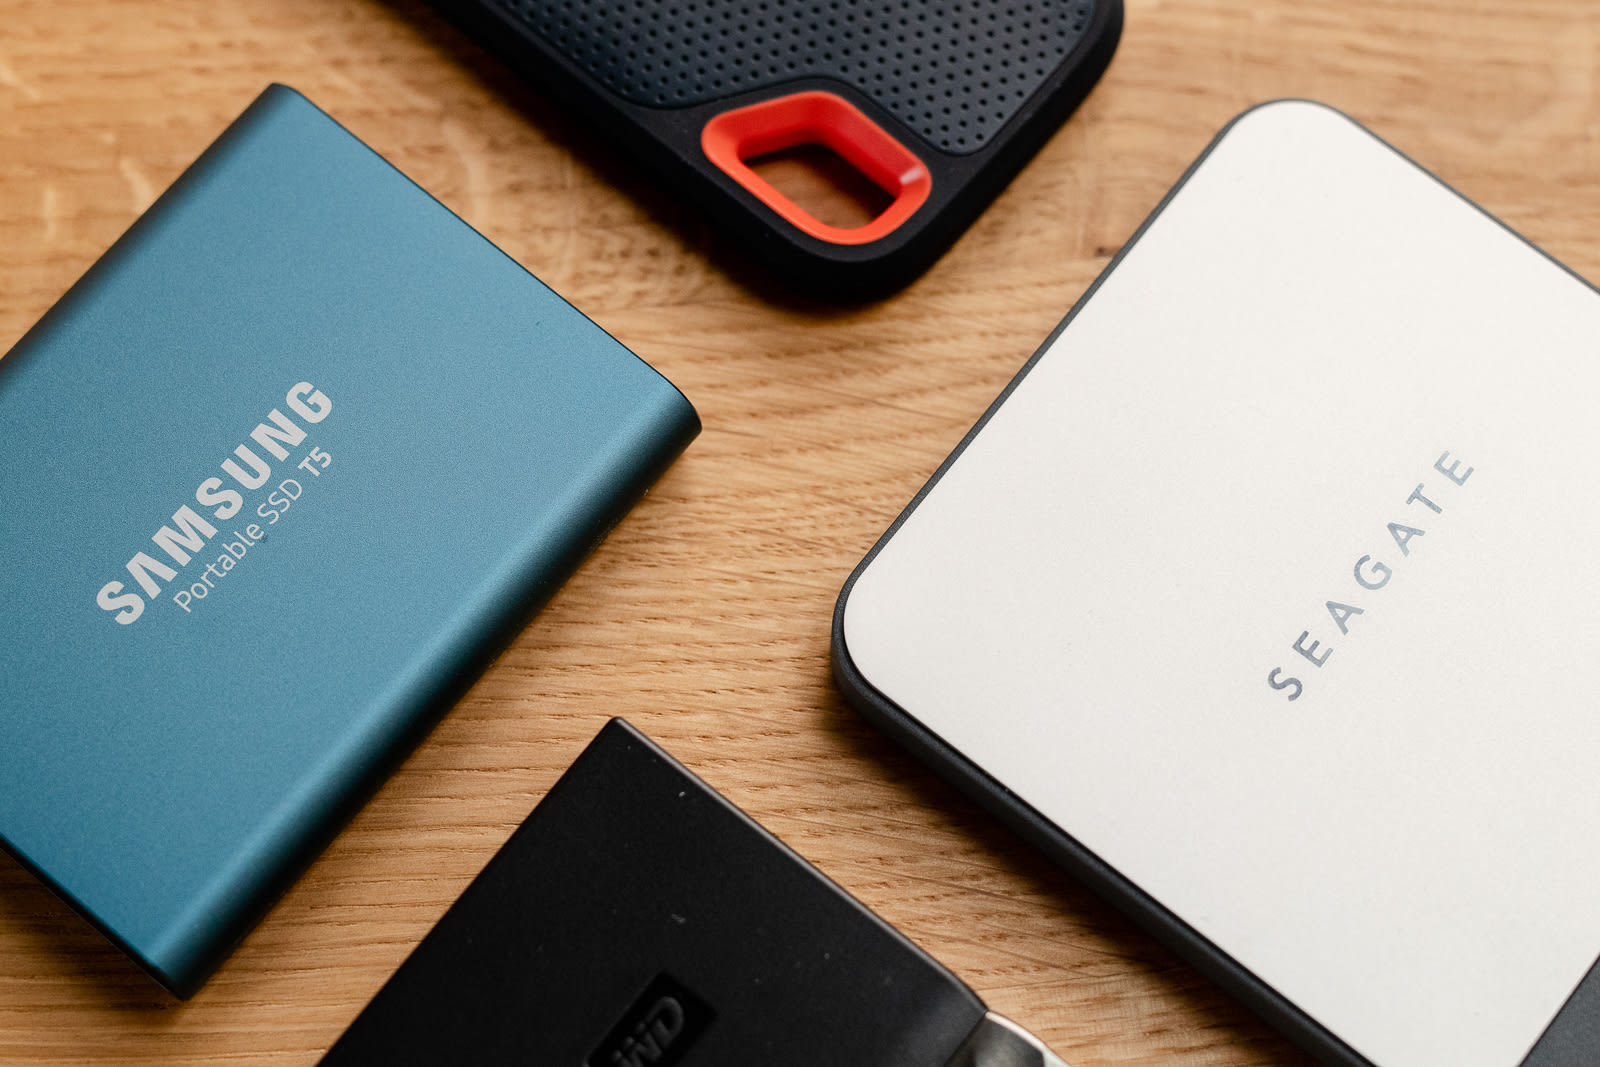 ink Seem Incentive The best portable SSD | Engadget